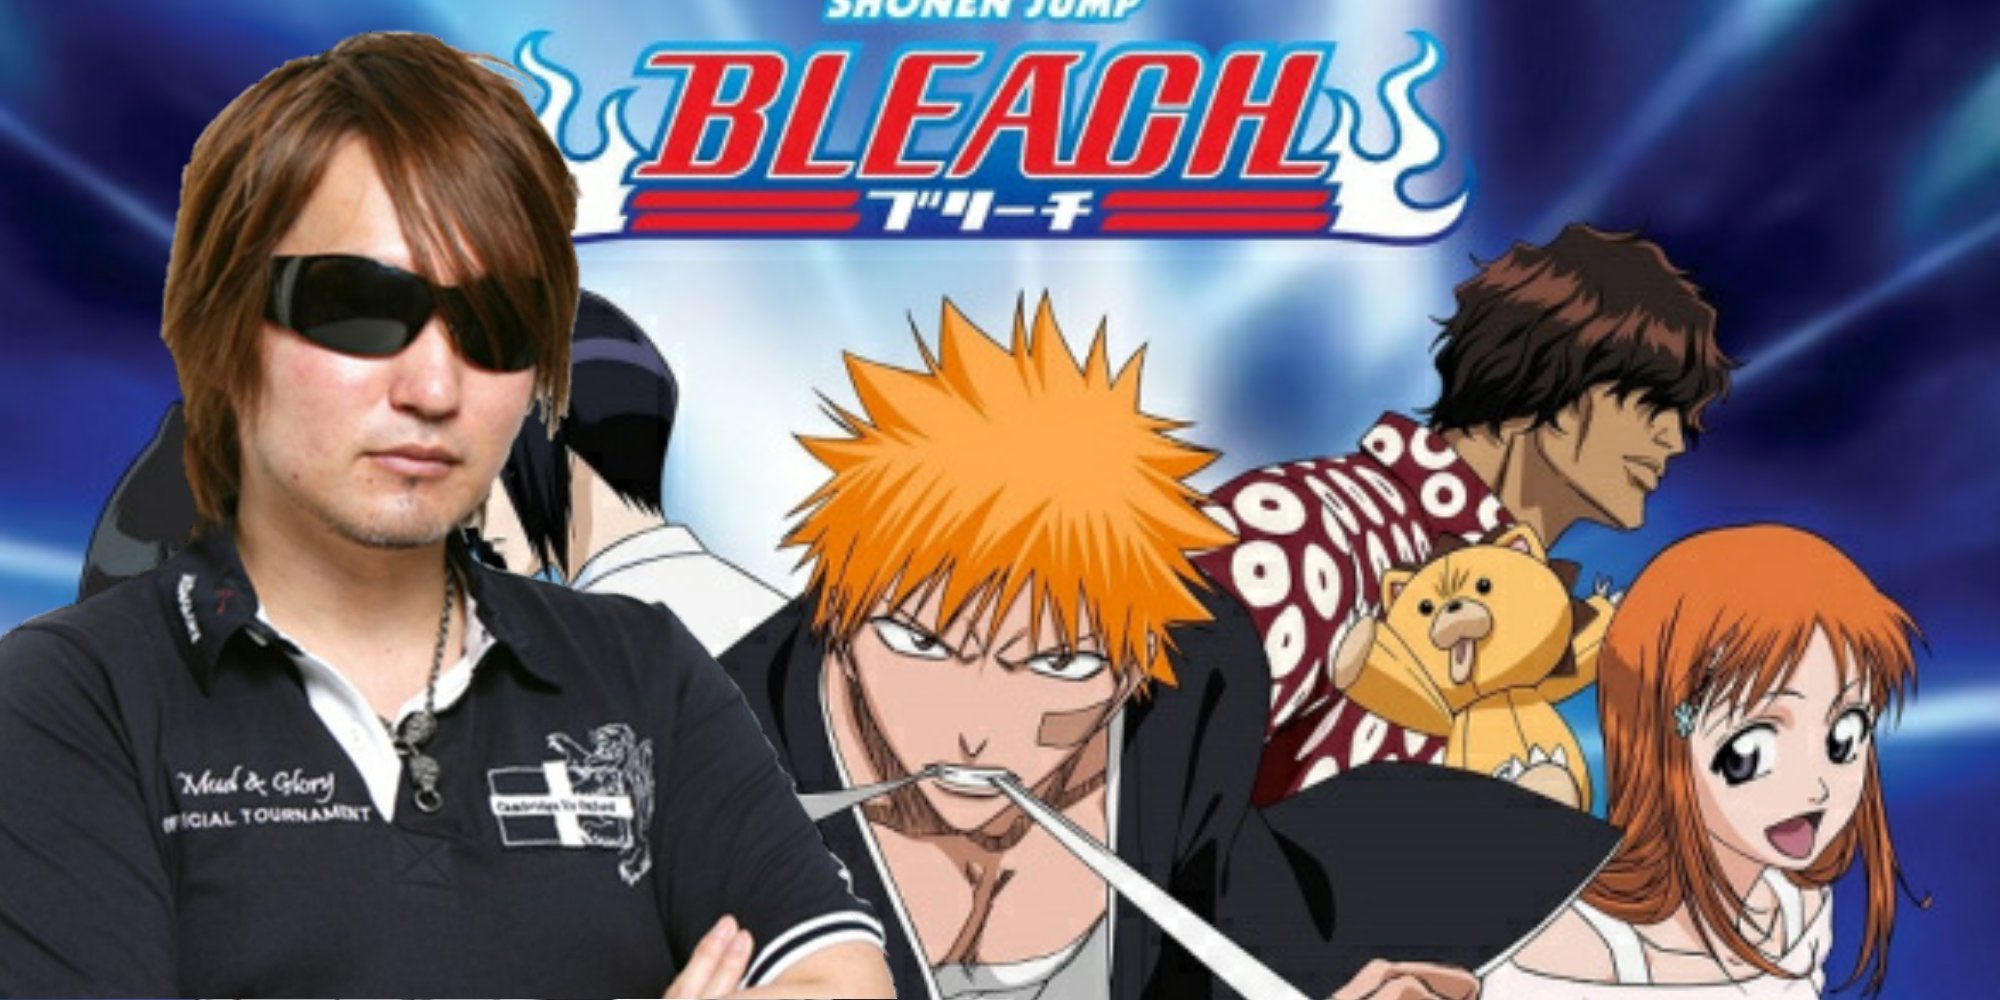 Happy birthday to one of my favorite mangakas of all time Tite Kubo!! 